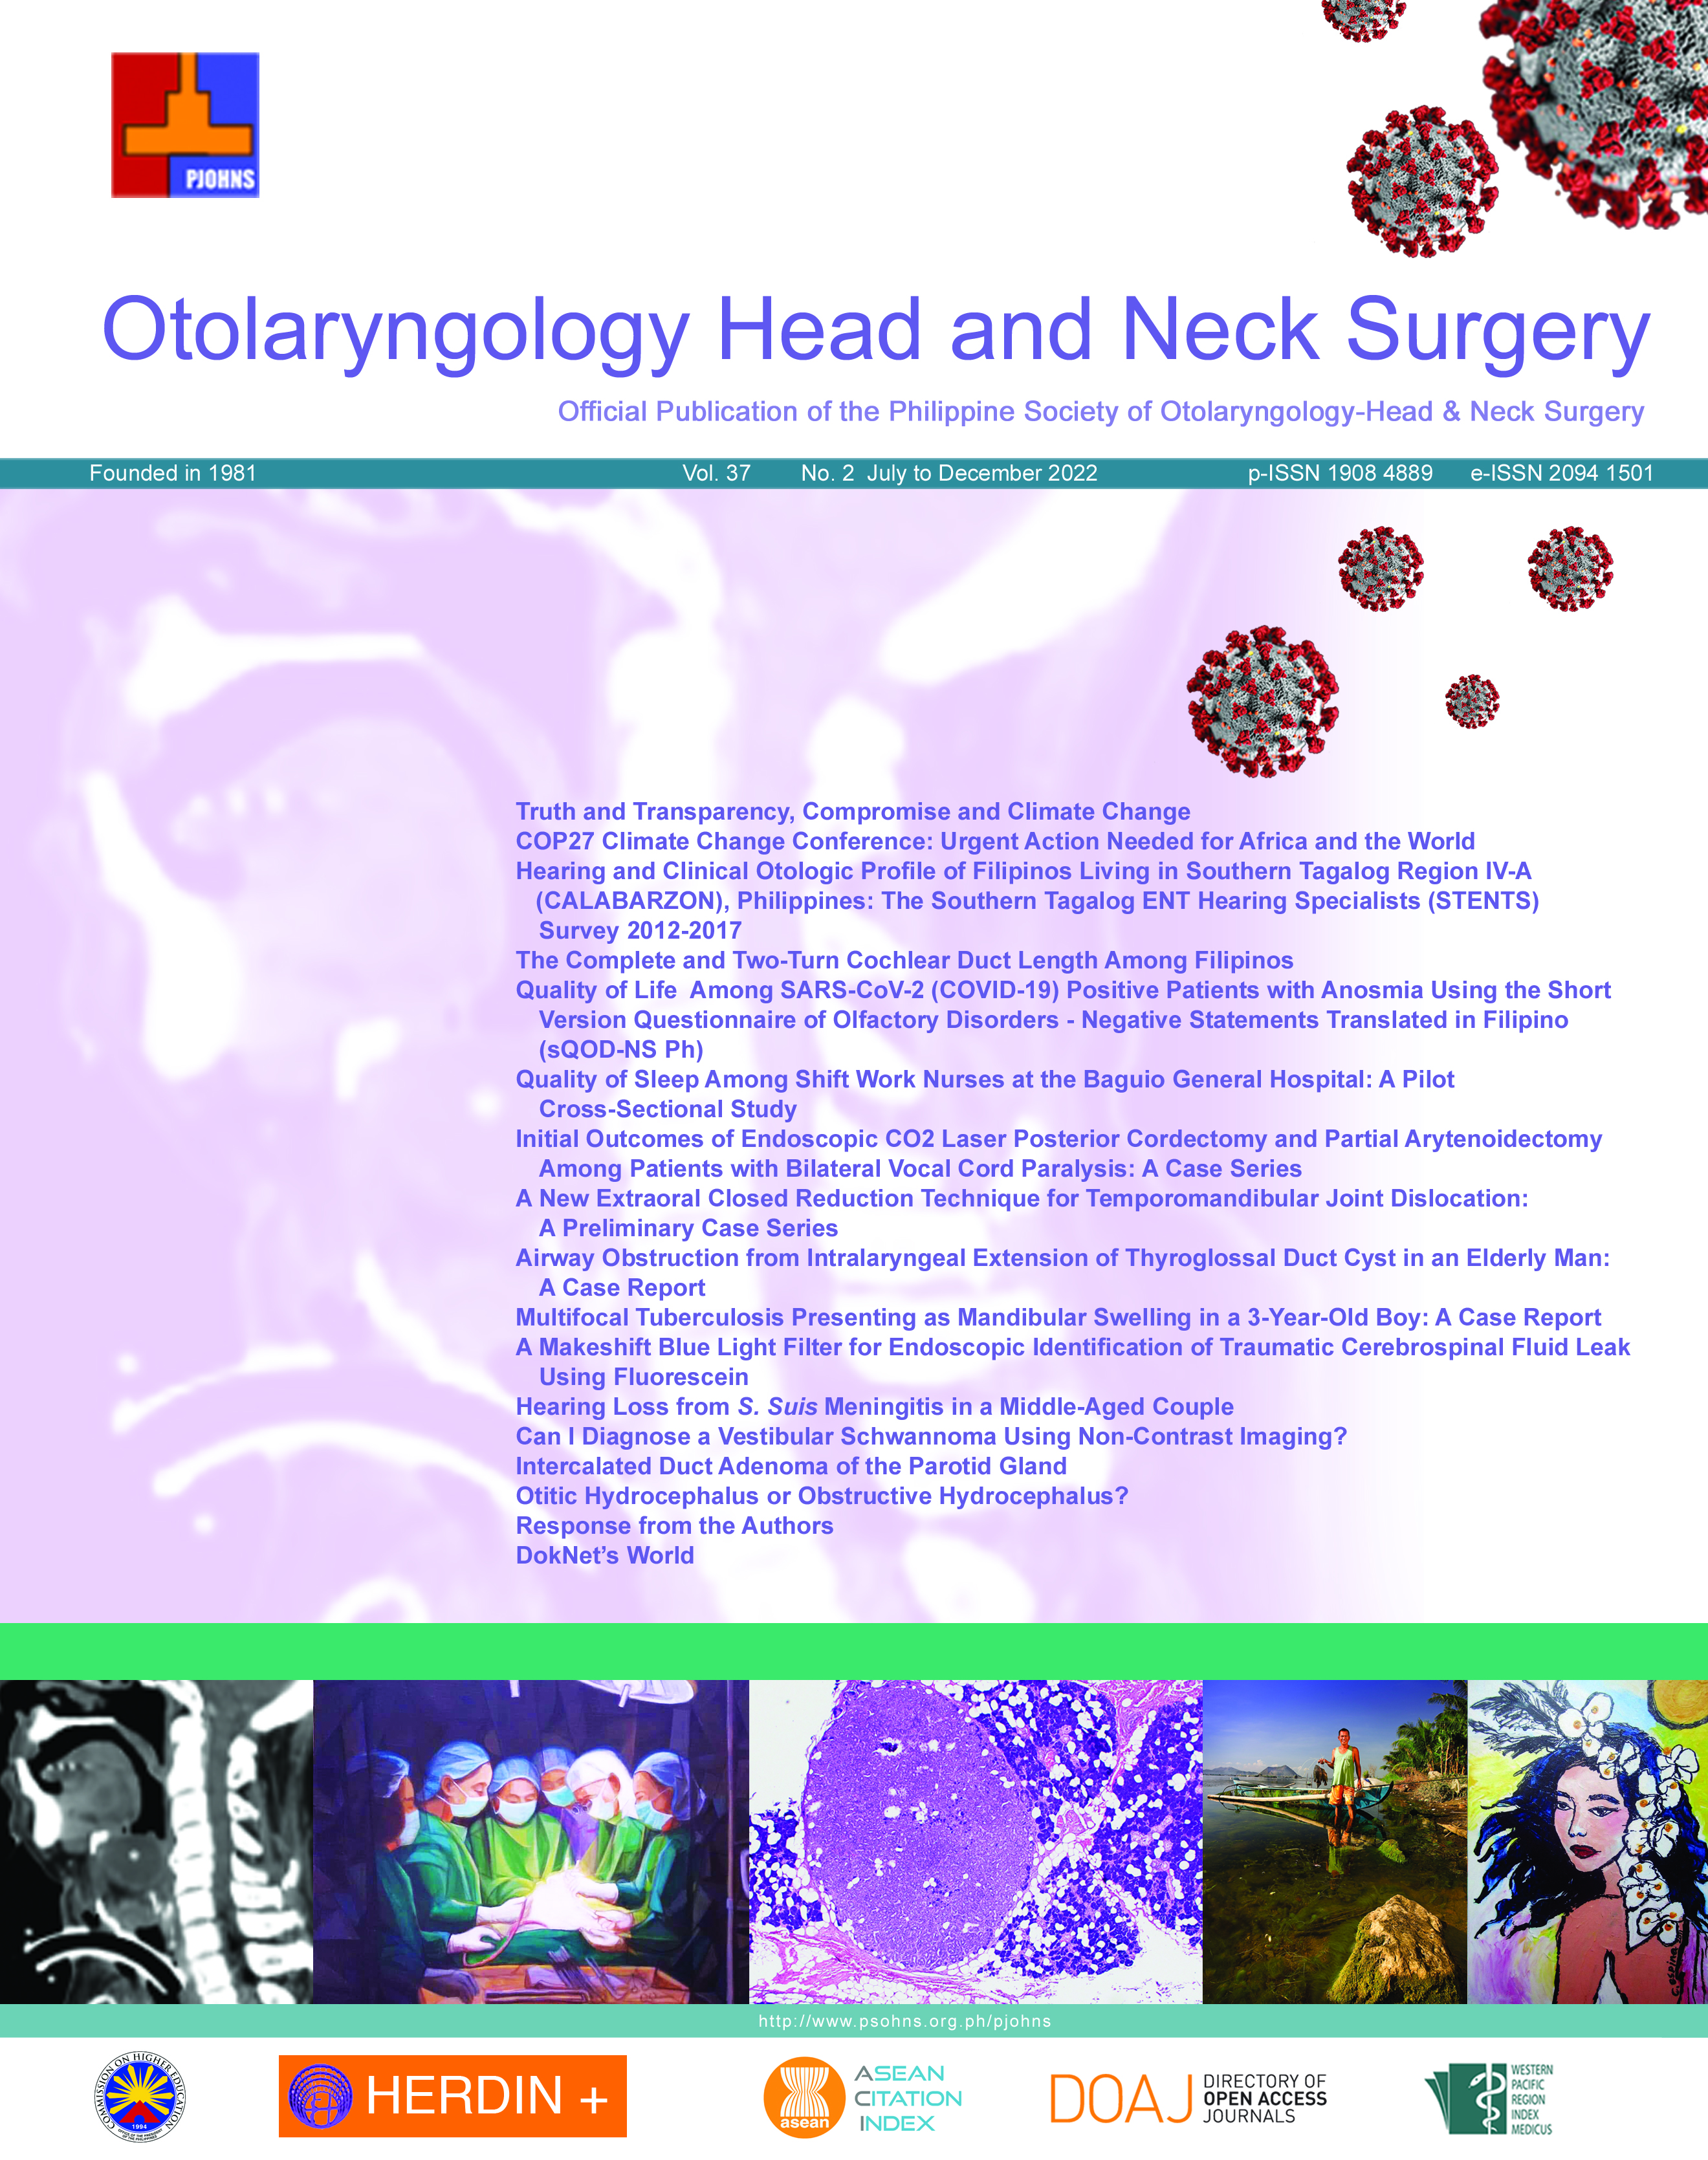 					View Vol. 37 No. 2 (2022): Philippine Journal of Otolaryngology Head and Neck Surgery
				